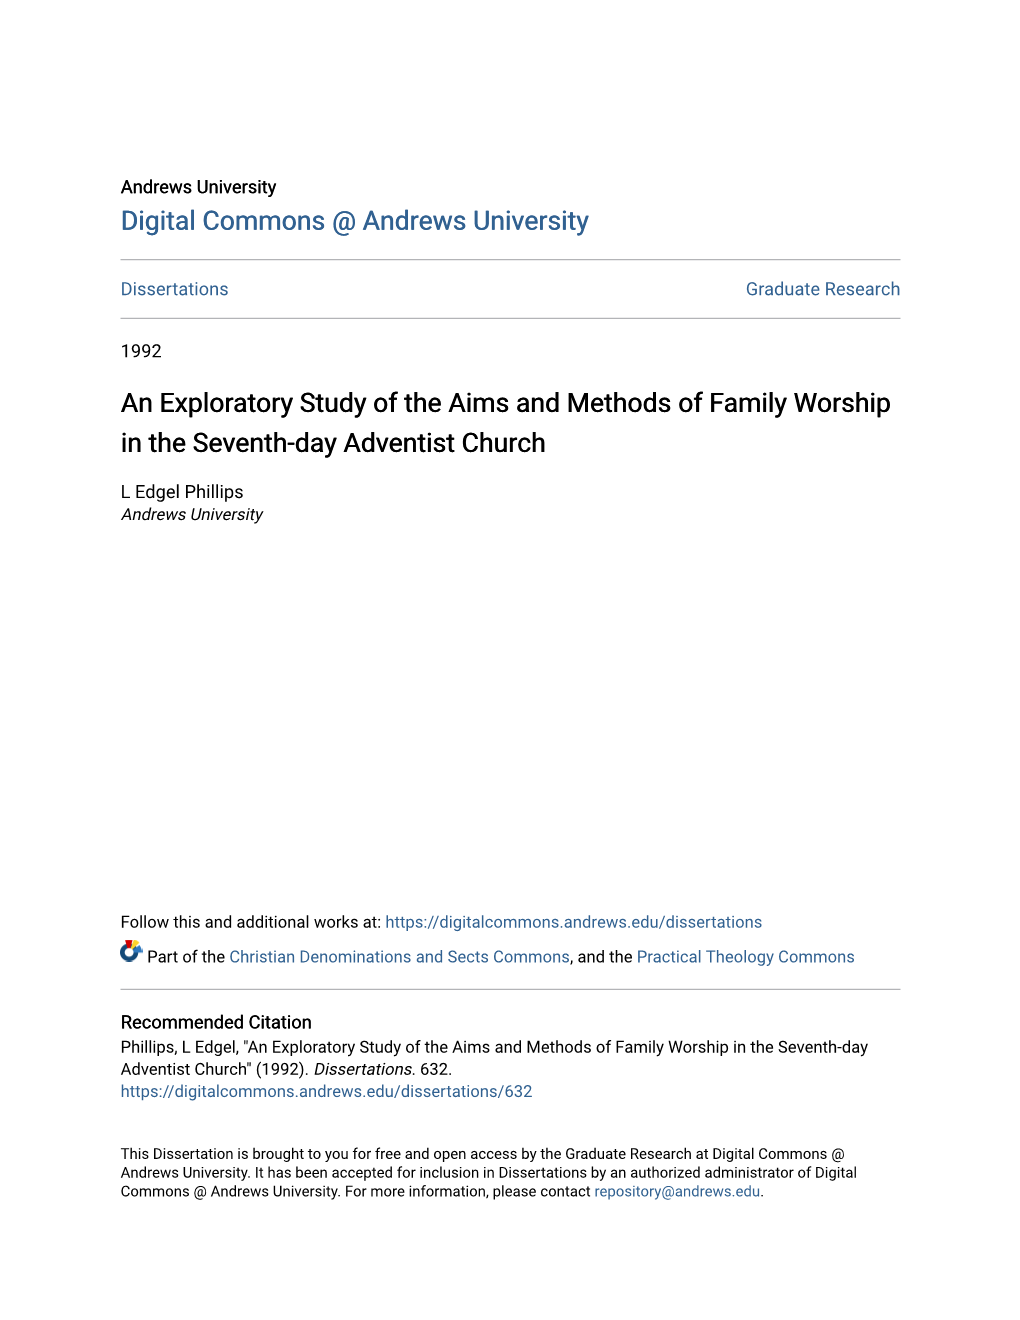 An Exploratory Study of the Aims and Methods of Family Worship in the Seventh-Day Adventist Church